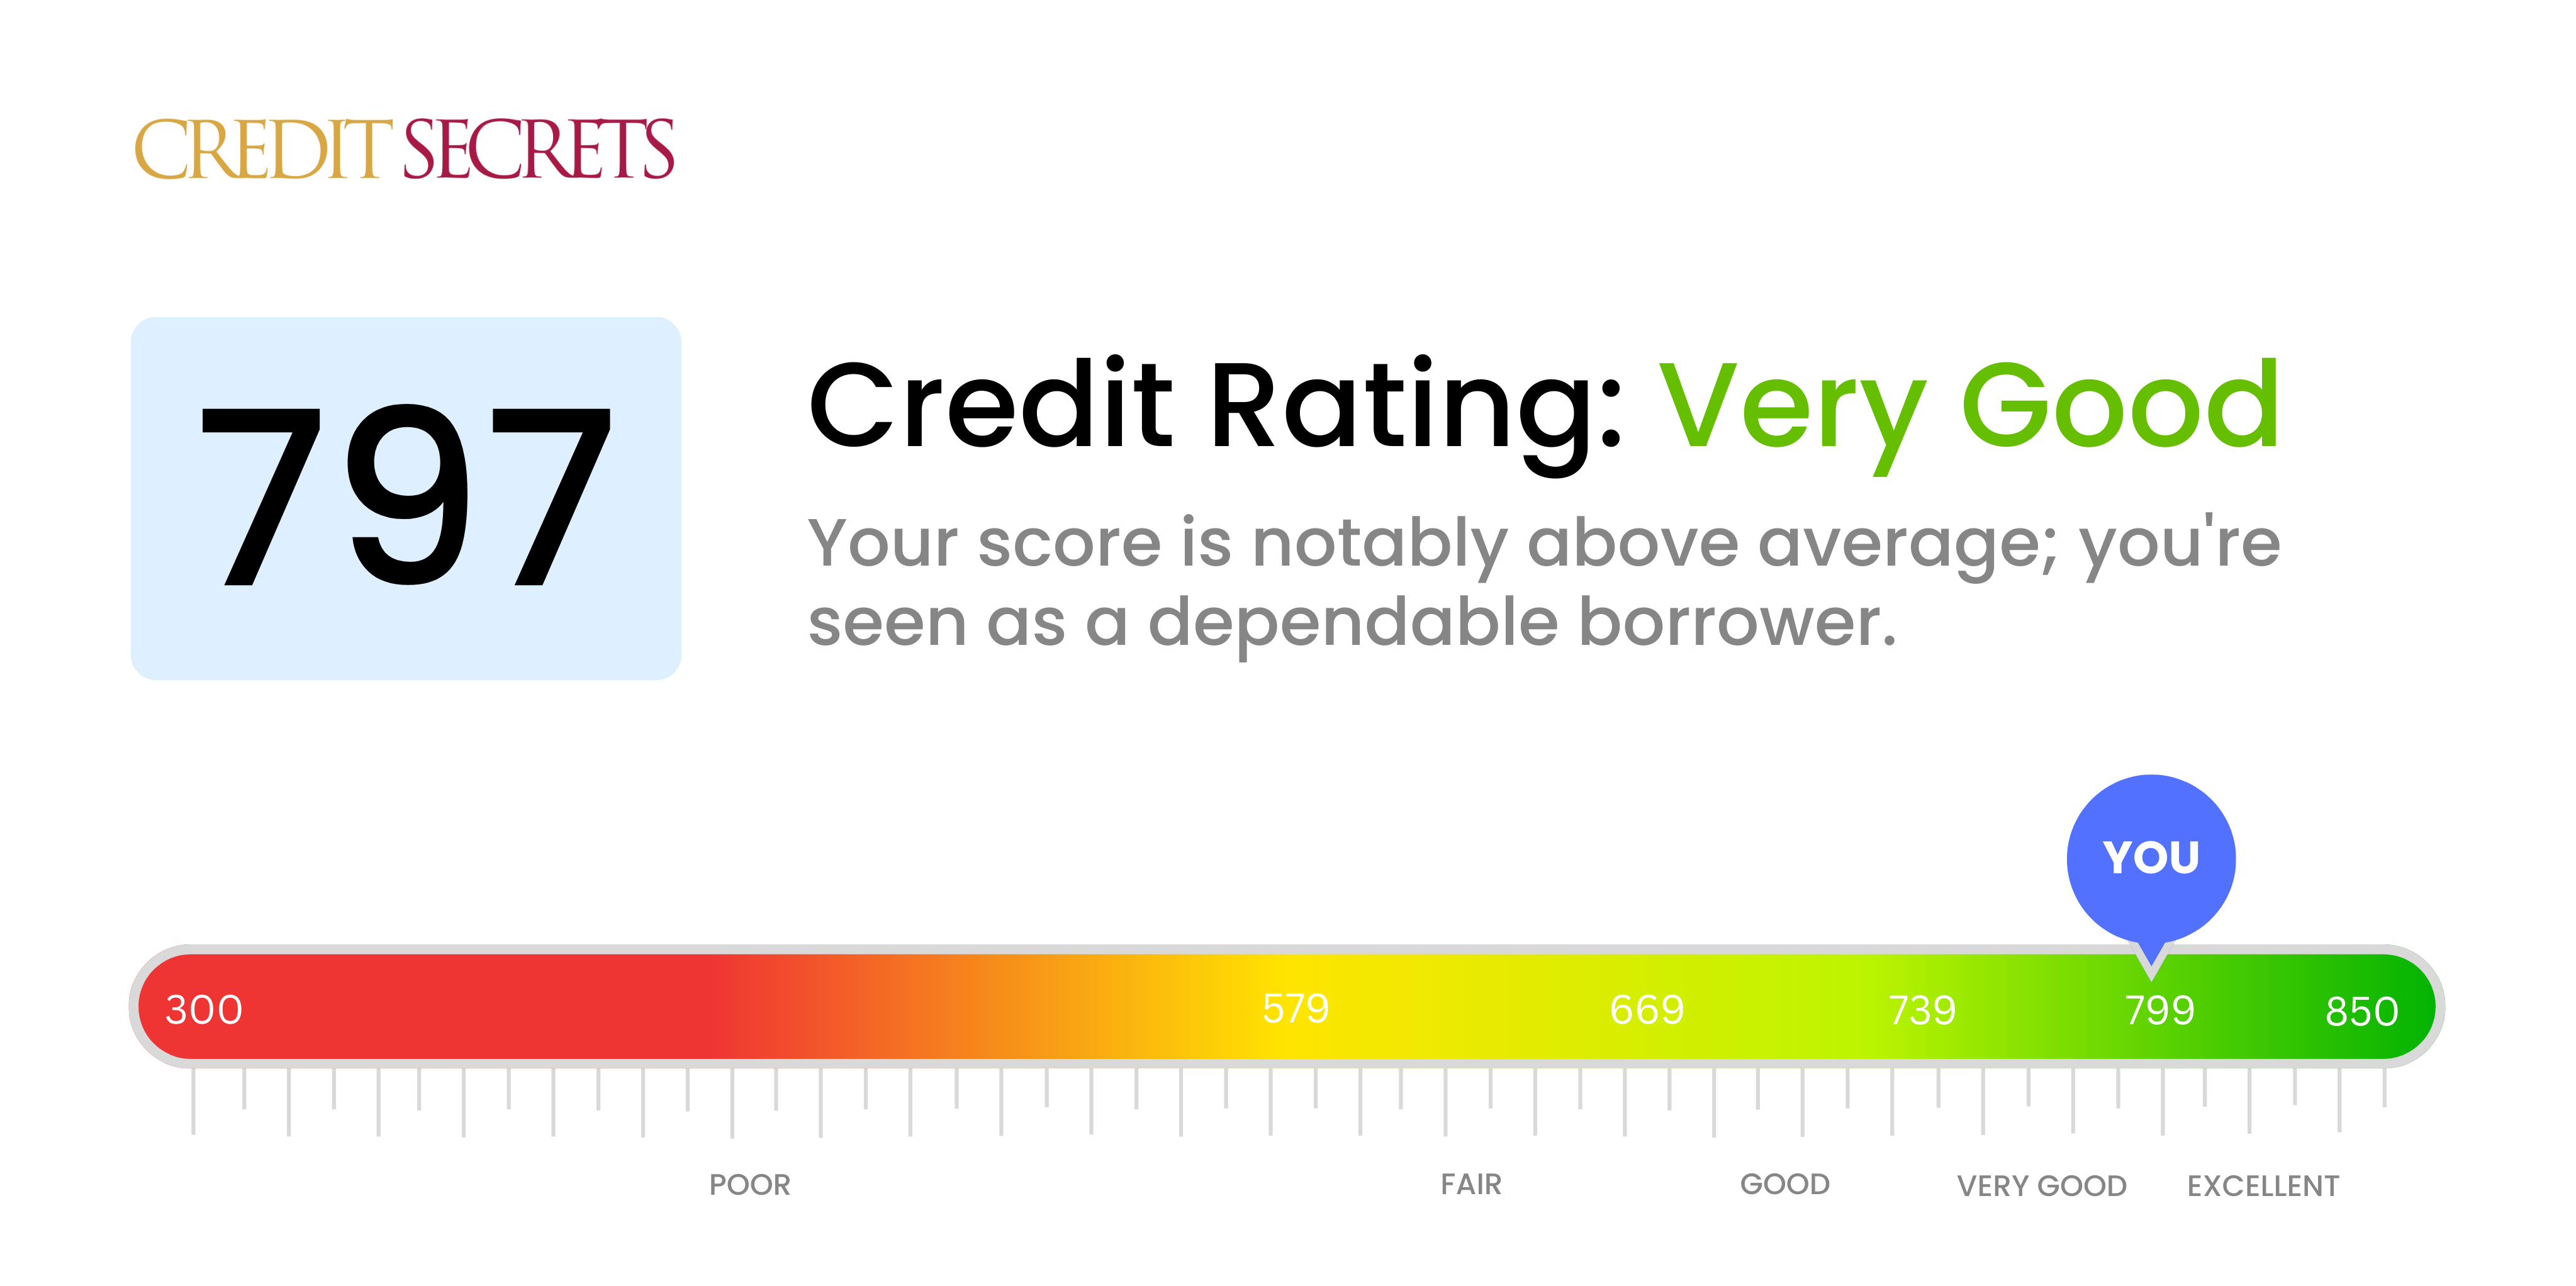 Is 797 a good credit score?